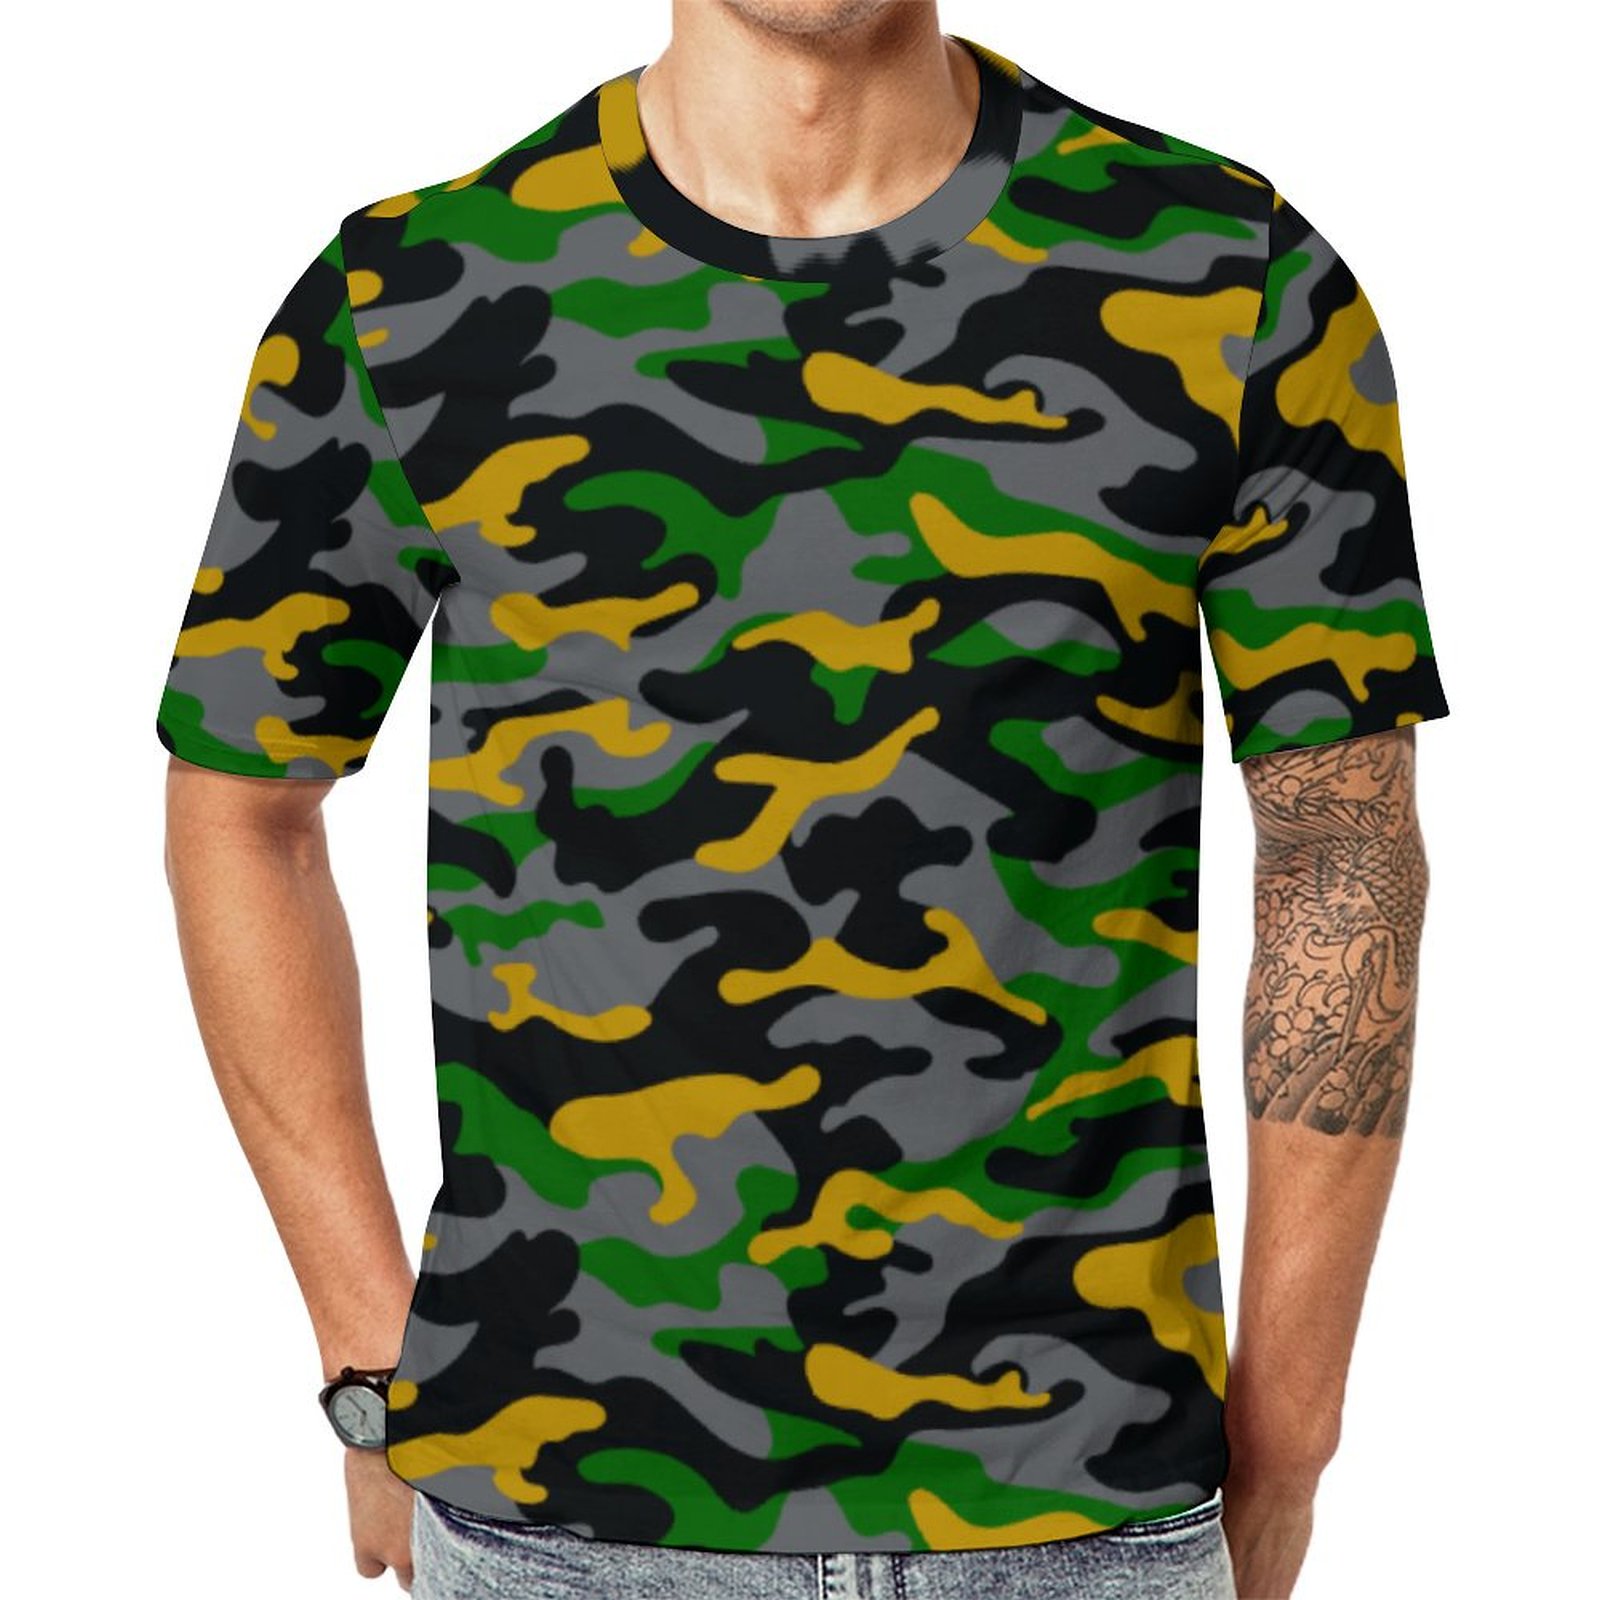 Jamaica Camo Army Fatigue Camouflage Short Sleeve Print Unisex Tshirt Summer Casual Tees for Men and Women Coolcoshirts